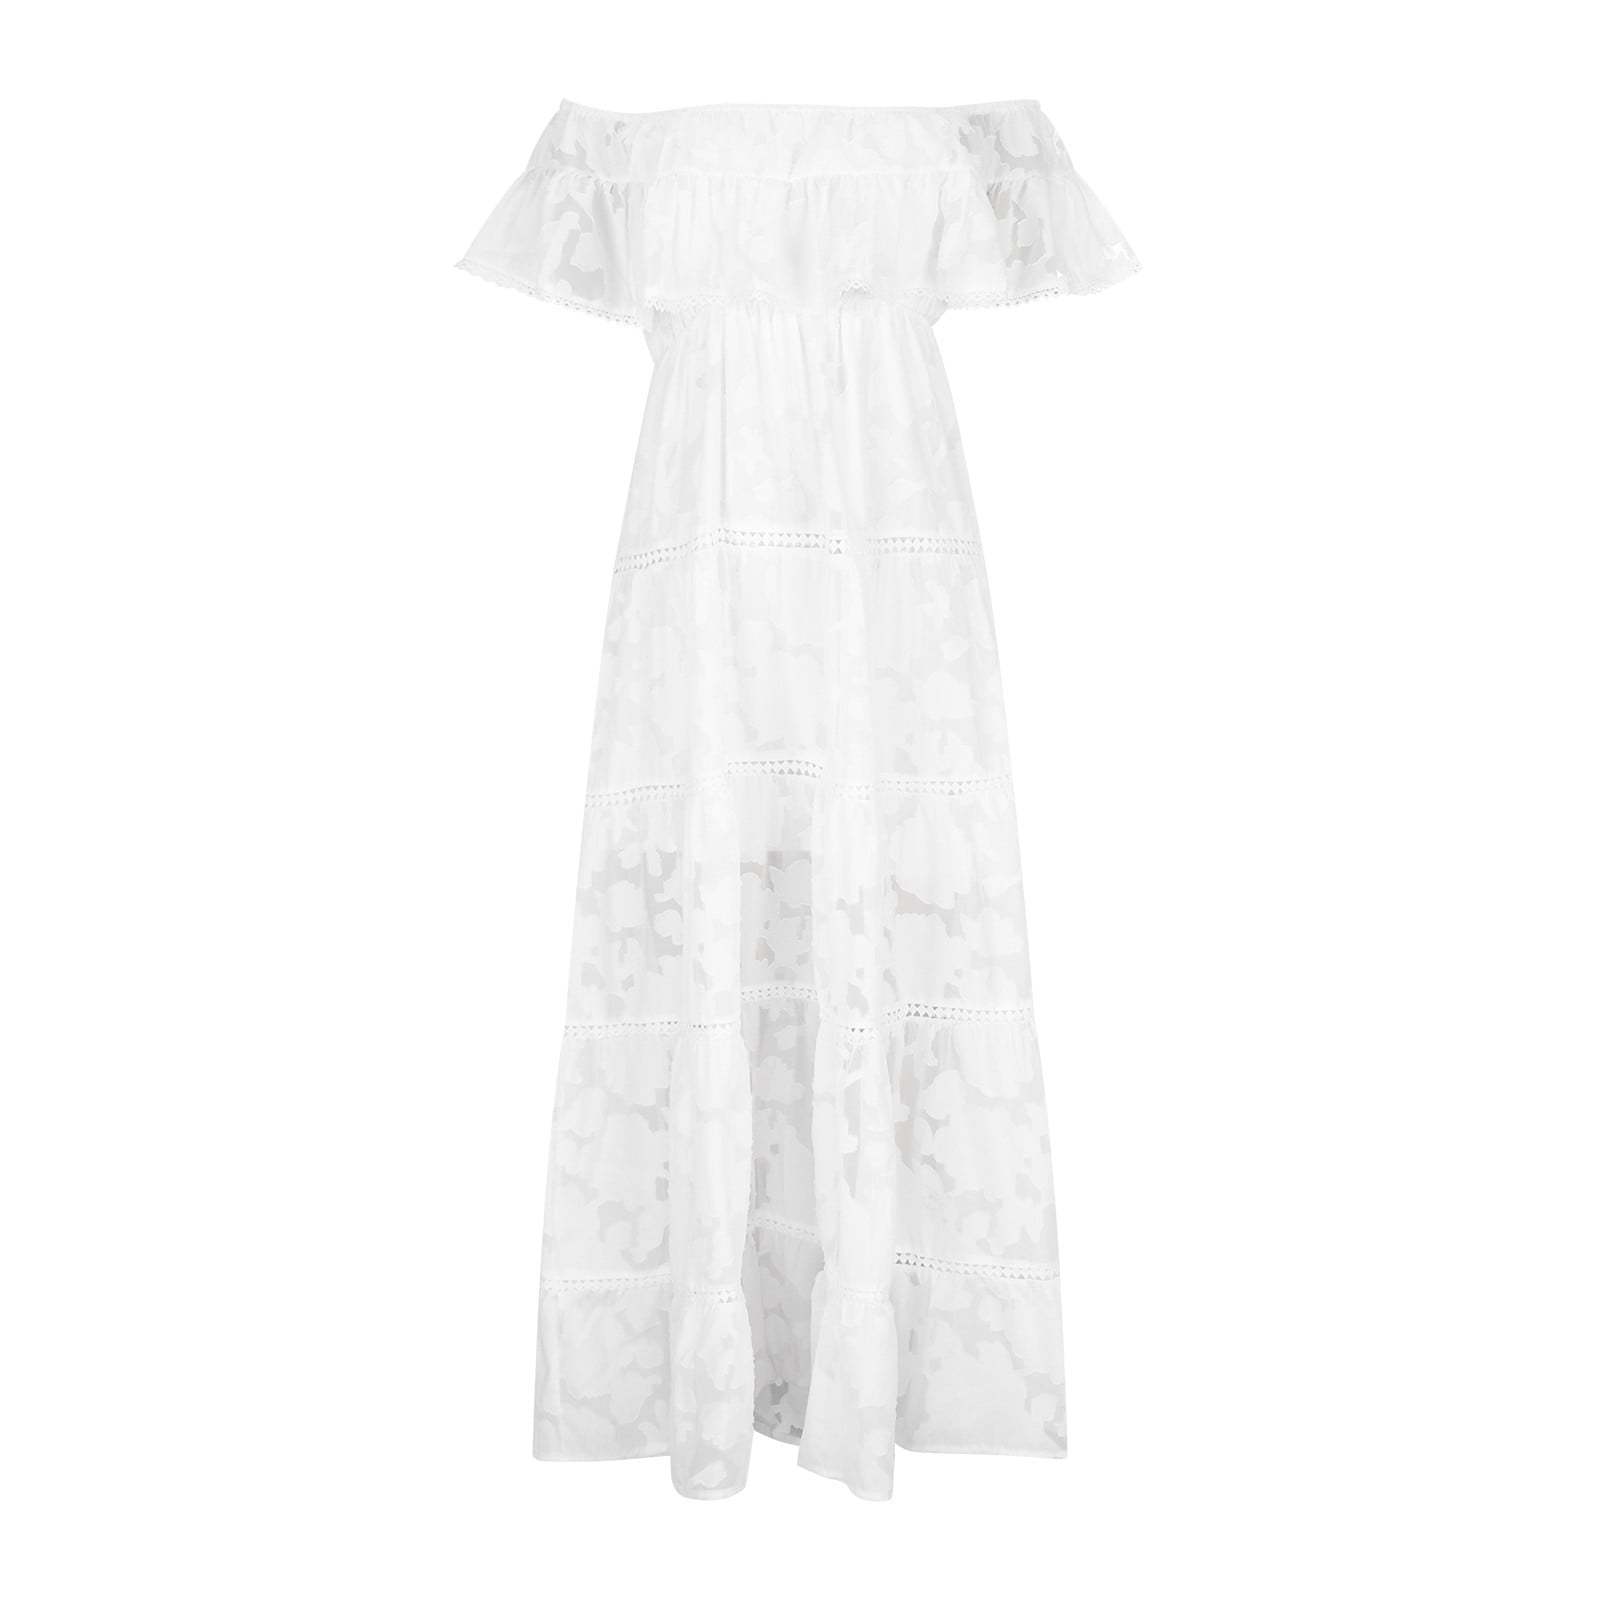 Plus Dress Women, for Sleeve XL Ankle-Length Zpanxa Solid Maxi Guest Wedding Dress, Casual Short Dress, White Casual White Bohemian Long Dress, Size Off-The-Shoulder White Dresses